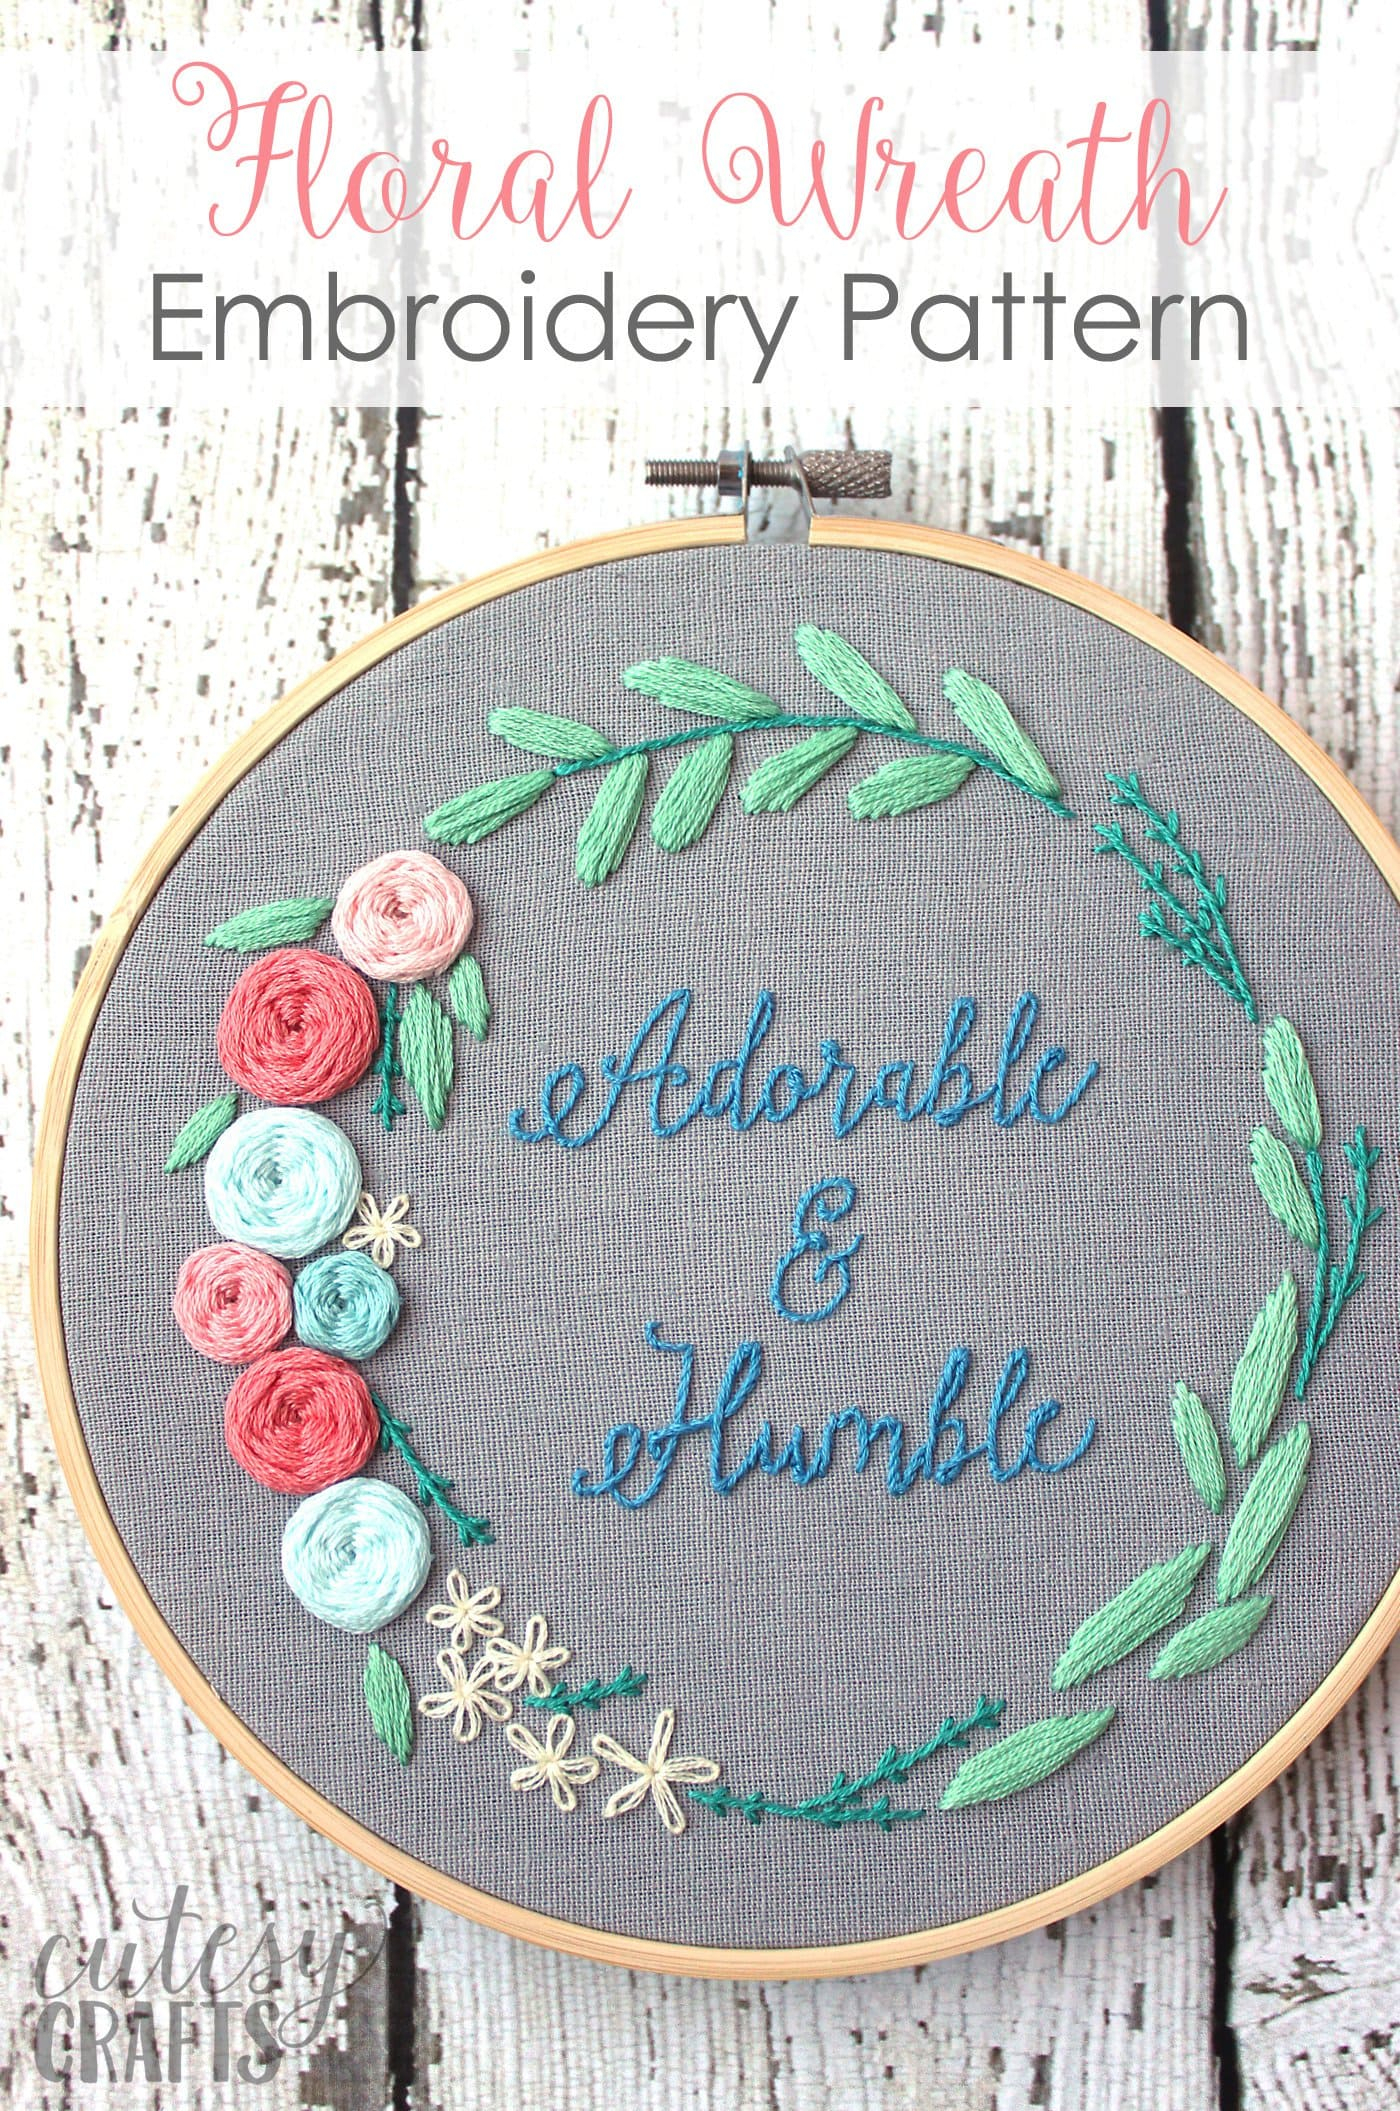 Cool Embroidery Patterns Adorable And Humble Free Floral Wreath Hand Embroidery Pattern